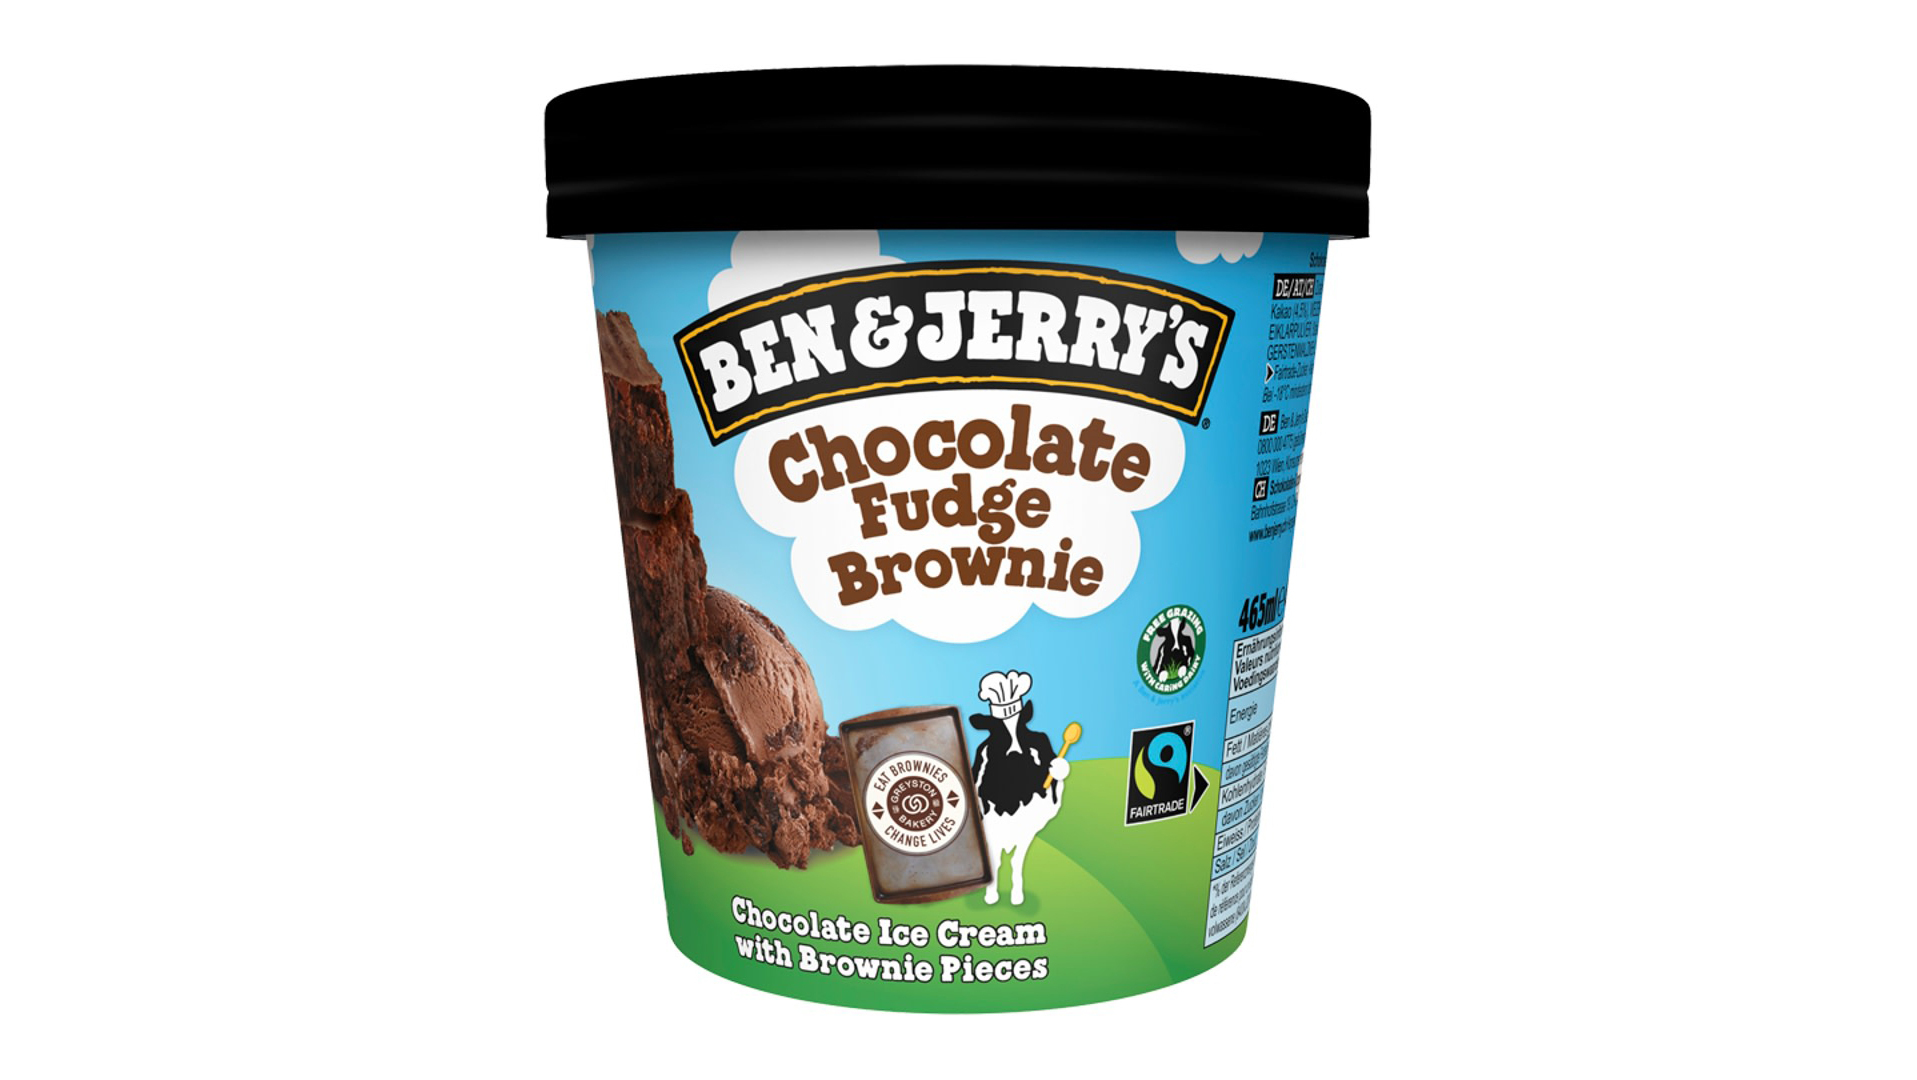 Ben & Jerry's Chocolate Fudge Brownie 500ml - Pizza Collection in Wanstead Flats E7